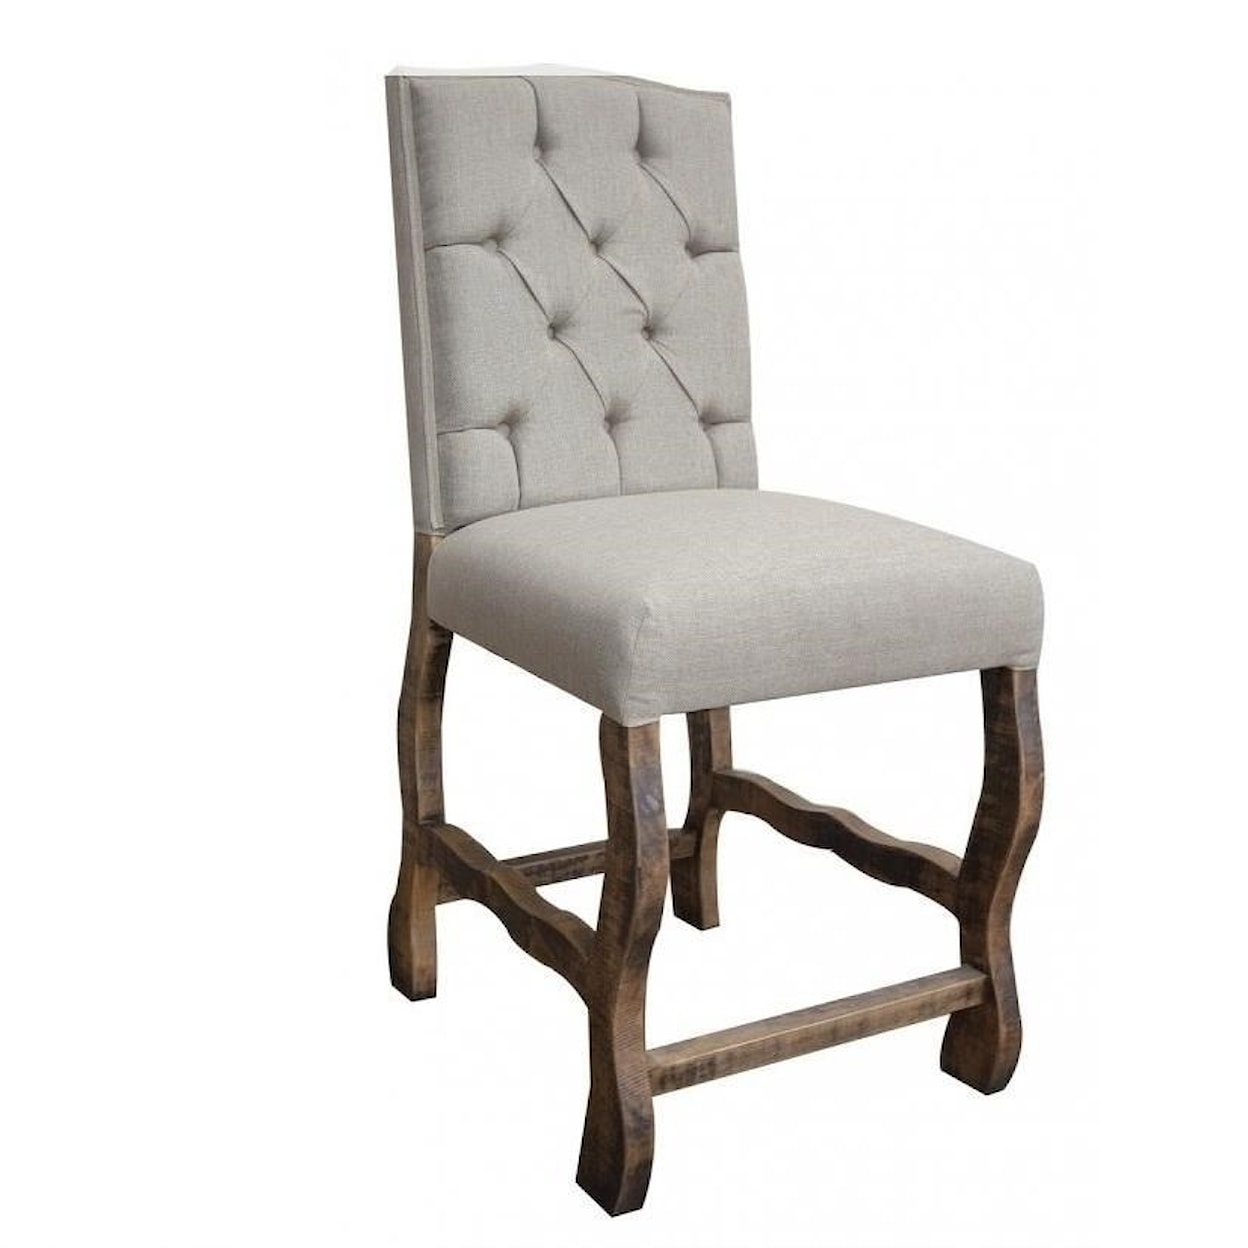 IFD Marquez Upholstered Barstool with Tufted Back